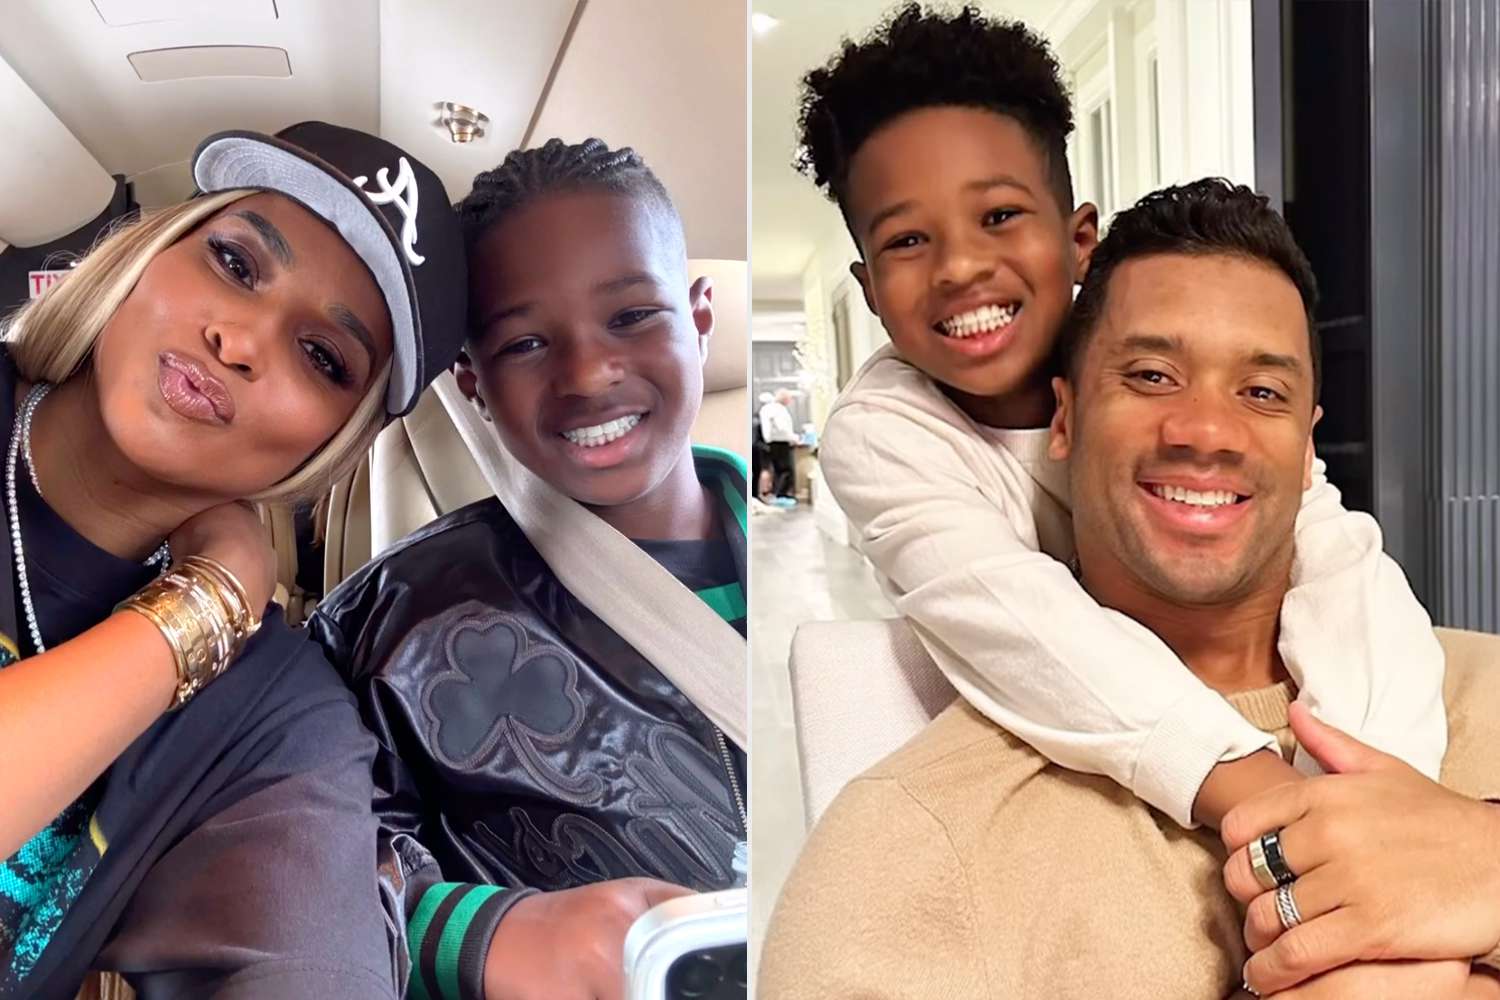 Ciara and Russell Wilson Celebrate Son Future’s 10th Birthday: ‘Our Biggest Blessing’